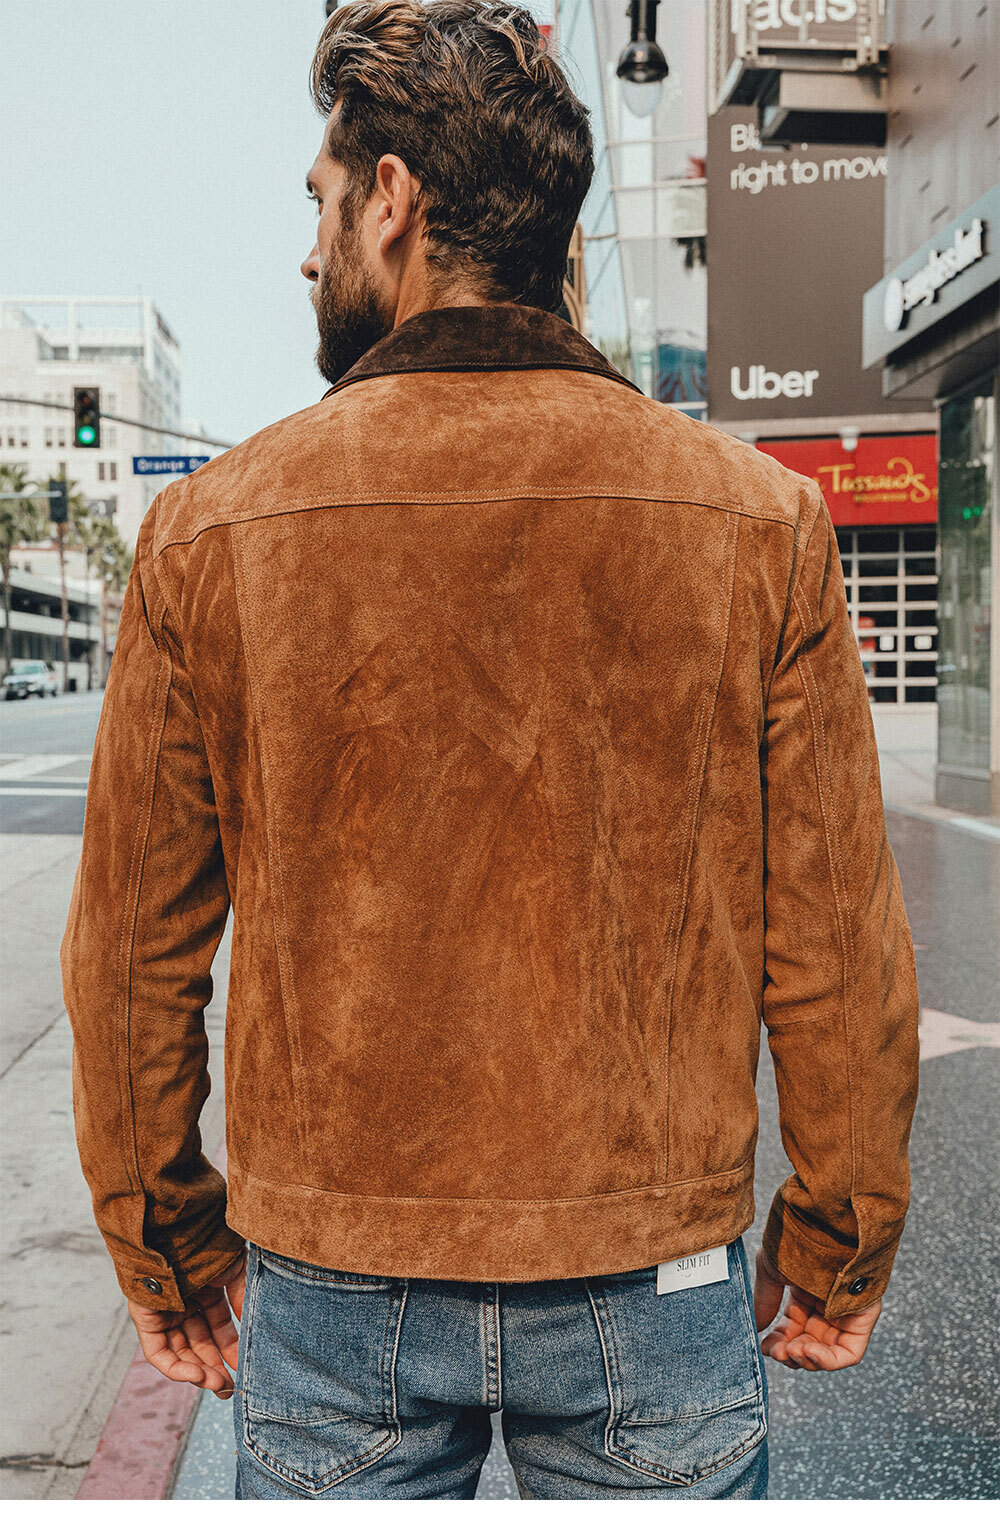 New Real Leather Jacket with Pigskin Leather Denim Jacket Brown Coat For Men MXGX20-9 